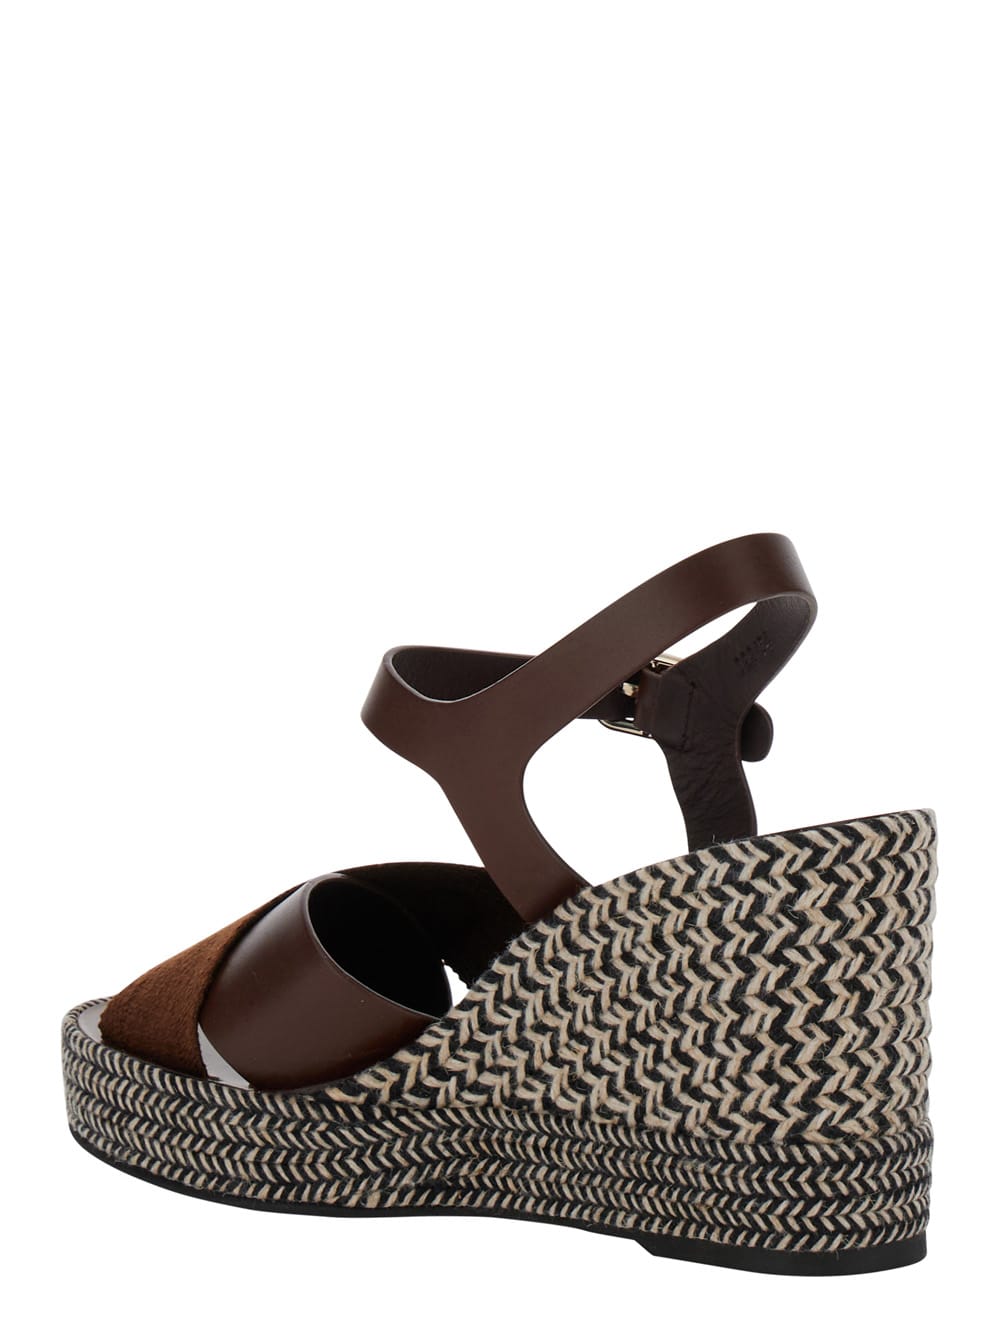 Shop Chloé Piia Brown Espadrillas Sandals With Wedge In Leather And Jute Woman